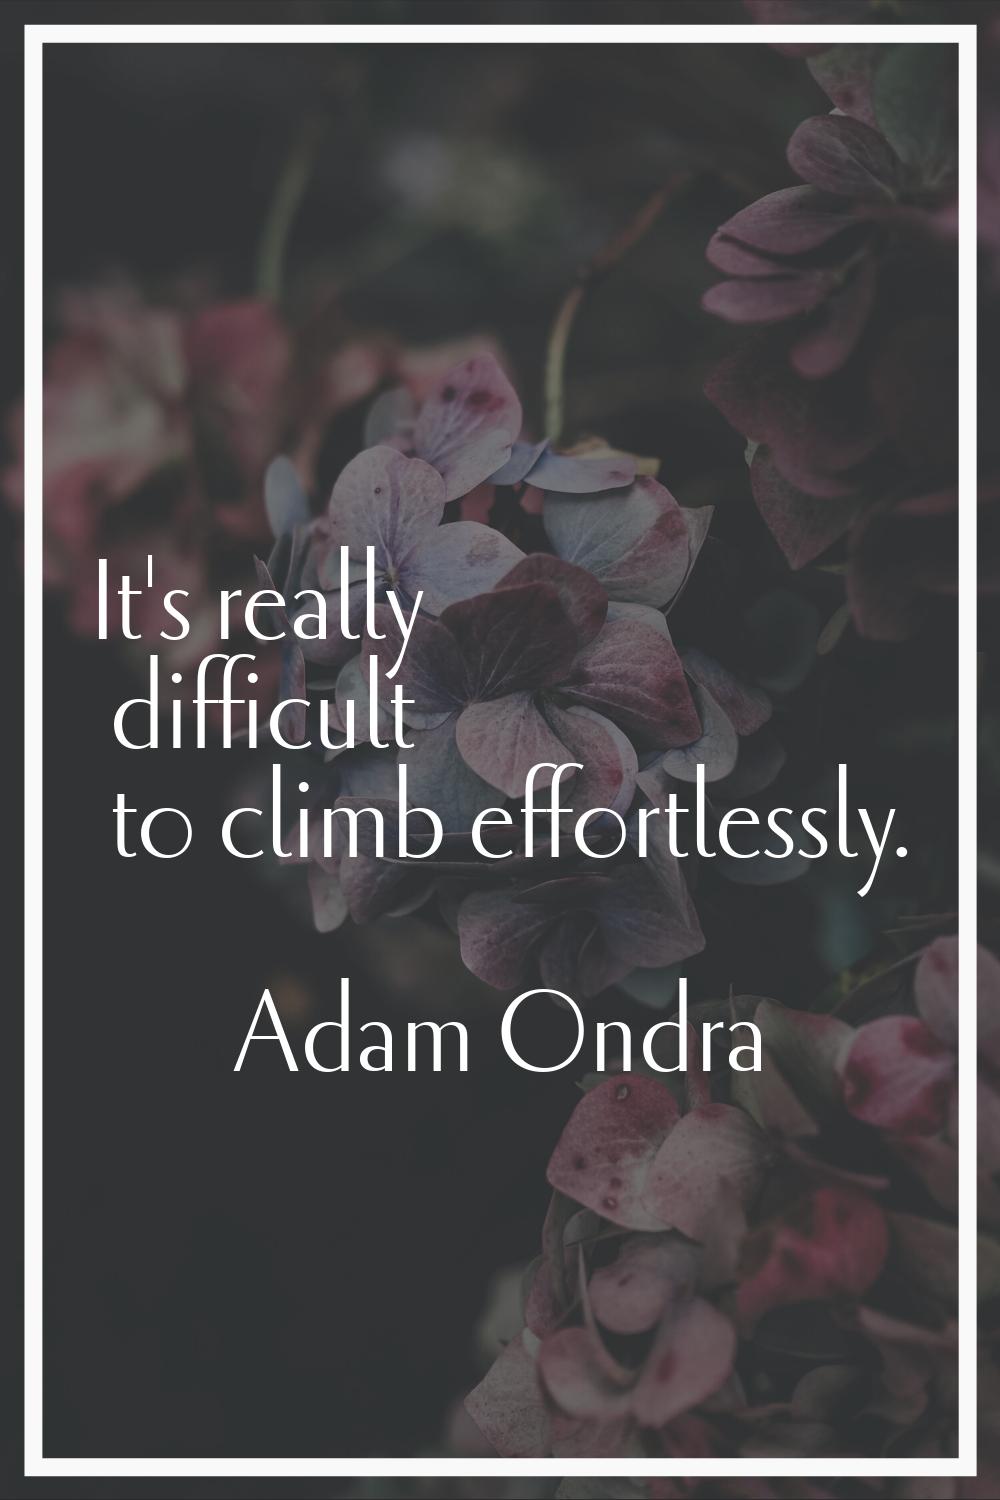 It's really difficult to climb effortlessly.